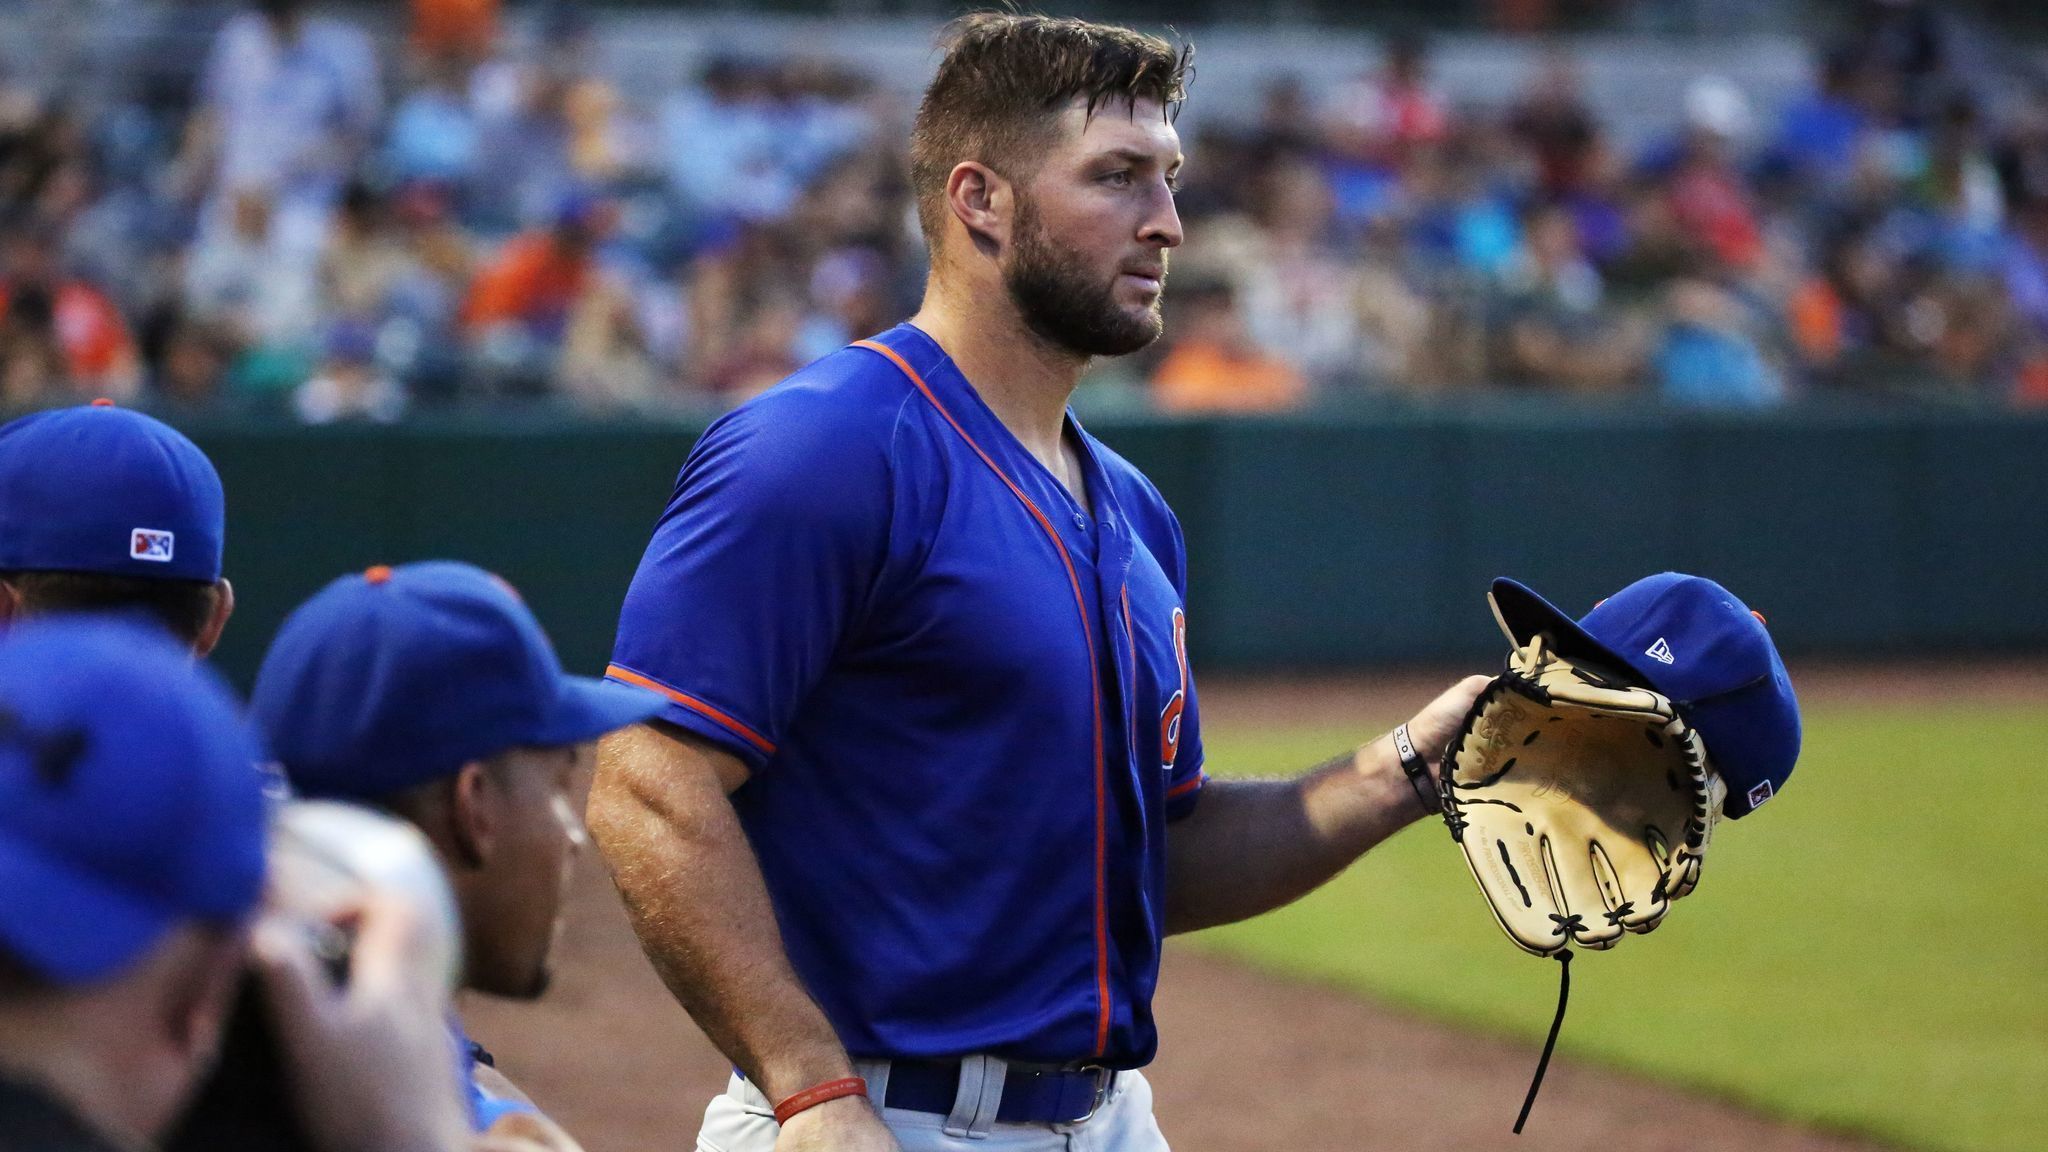 Tim Tebow goes hitless in series finale at Osceola County Stadium - Orlando Sentinel2048 x 1152